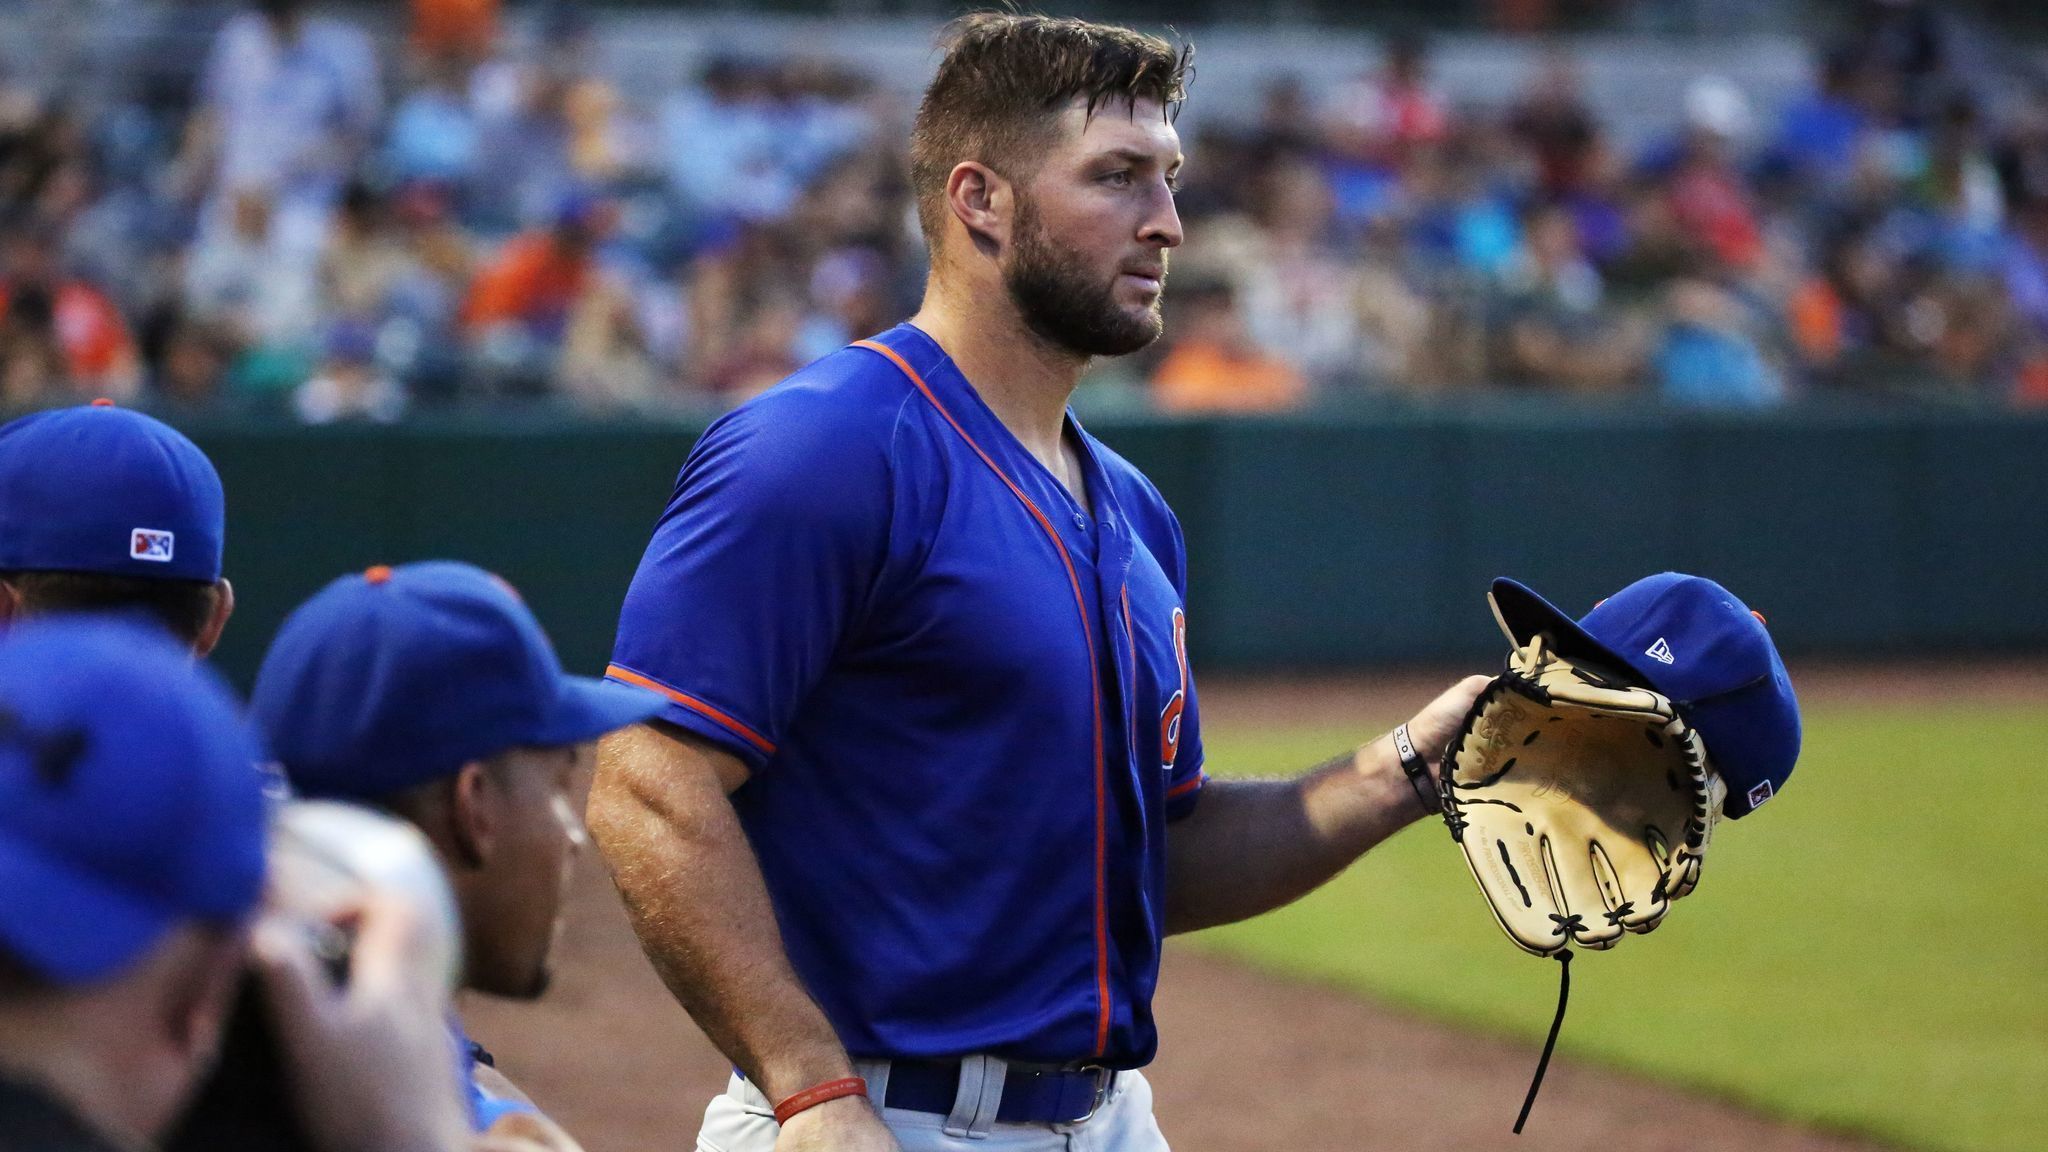 Tim Tebow goes hitless in series finale at Osceola County Stadium - Orlando Sentinel2048 x 1152